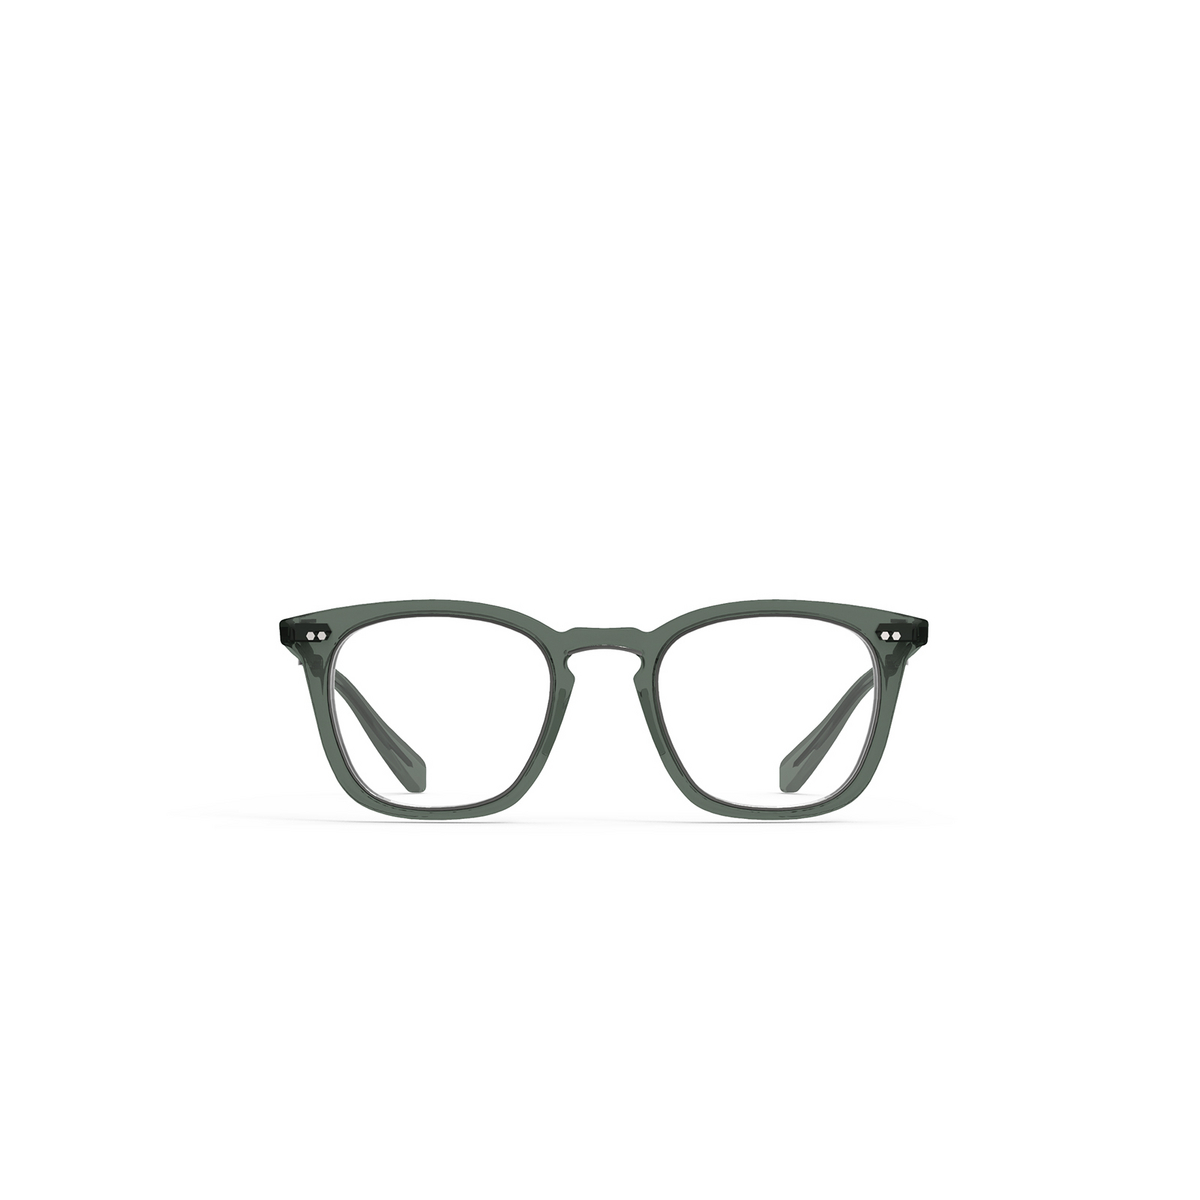 Mr. Leight GETTY II C Eyeglasses GRYS-PW Grey Sage-Pewter - front view